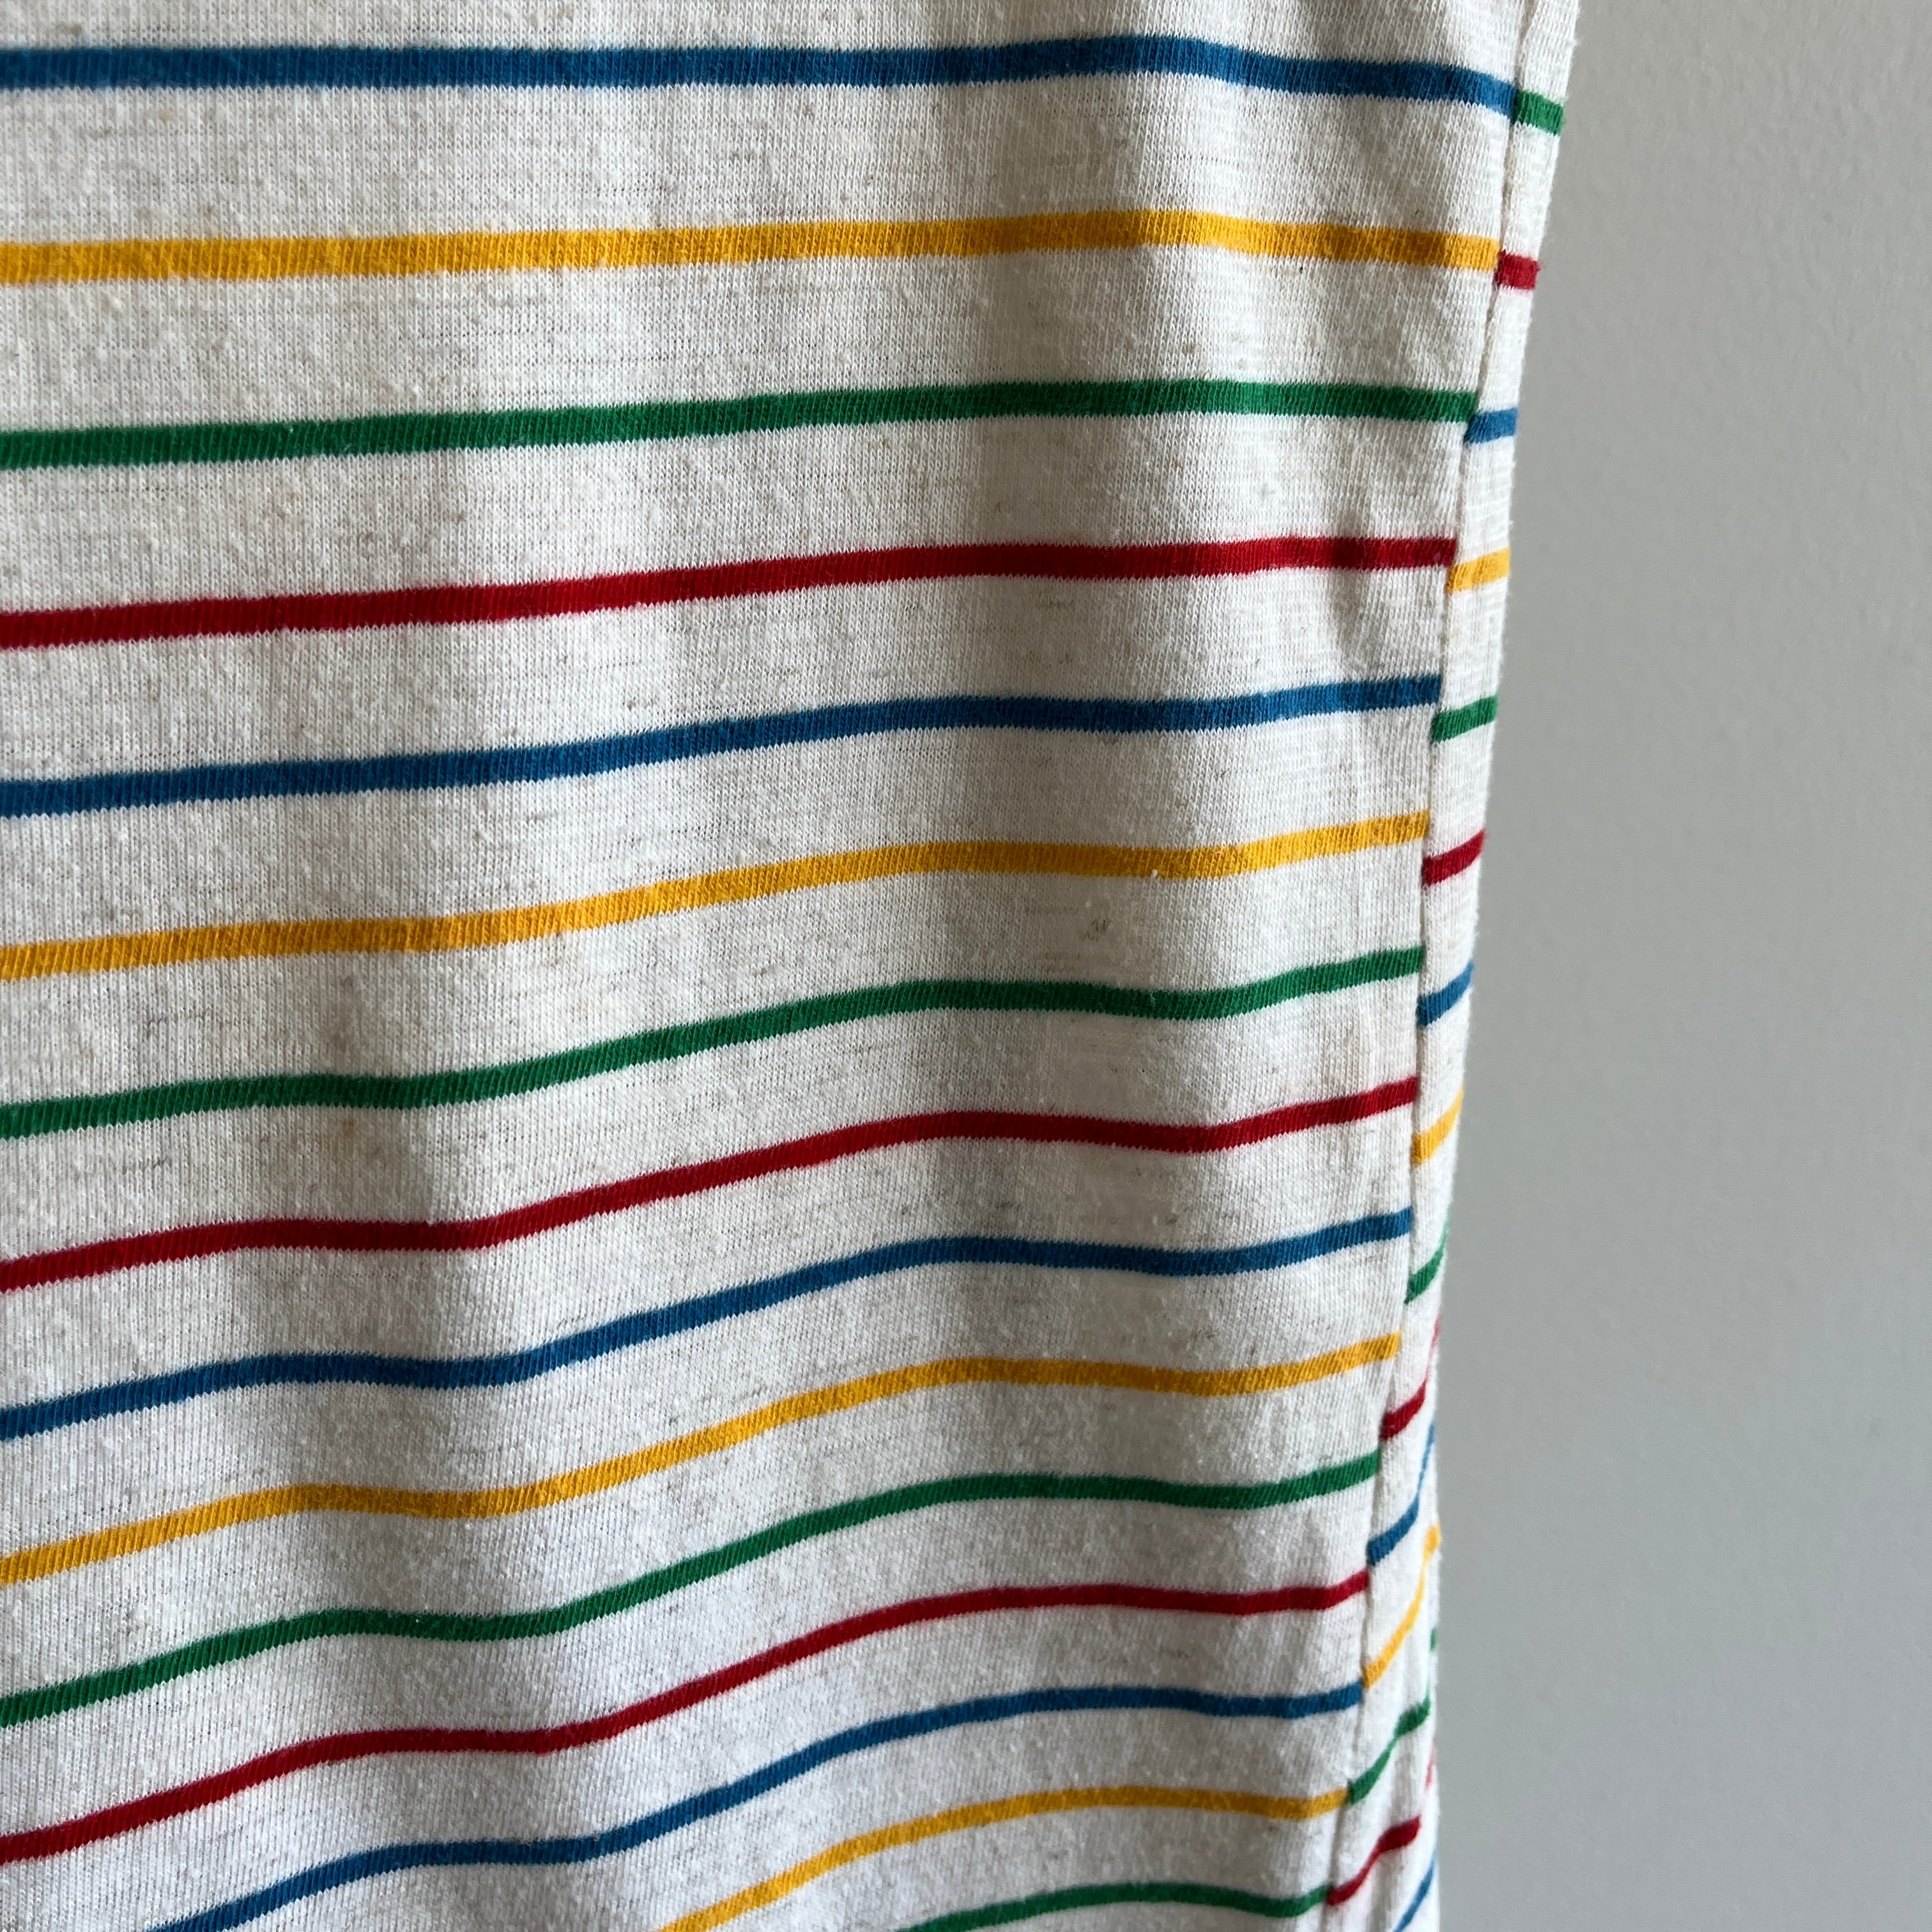 1970/80s Longer Striped Tank with a Slight Scoop Back